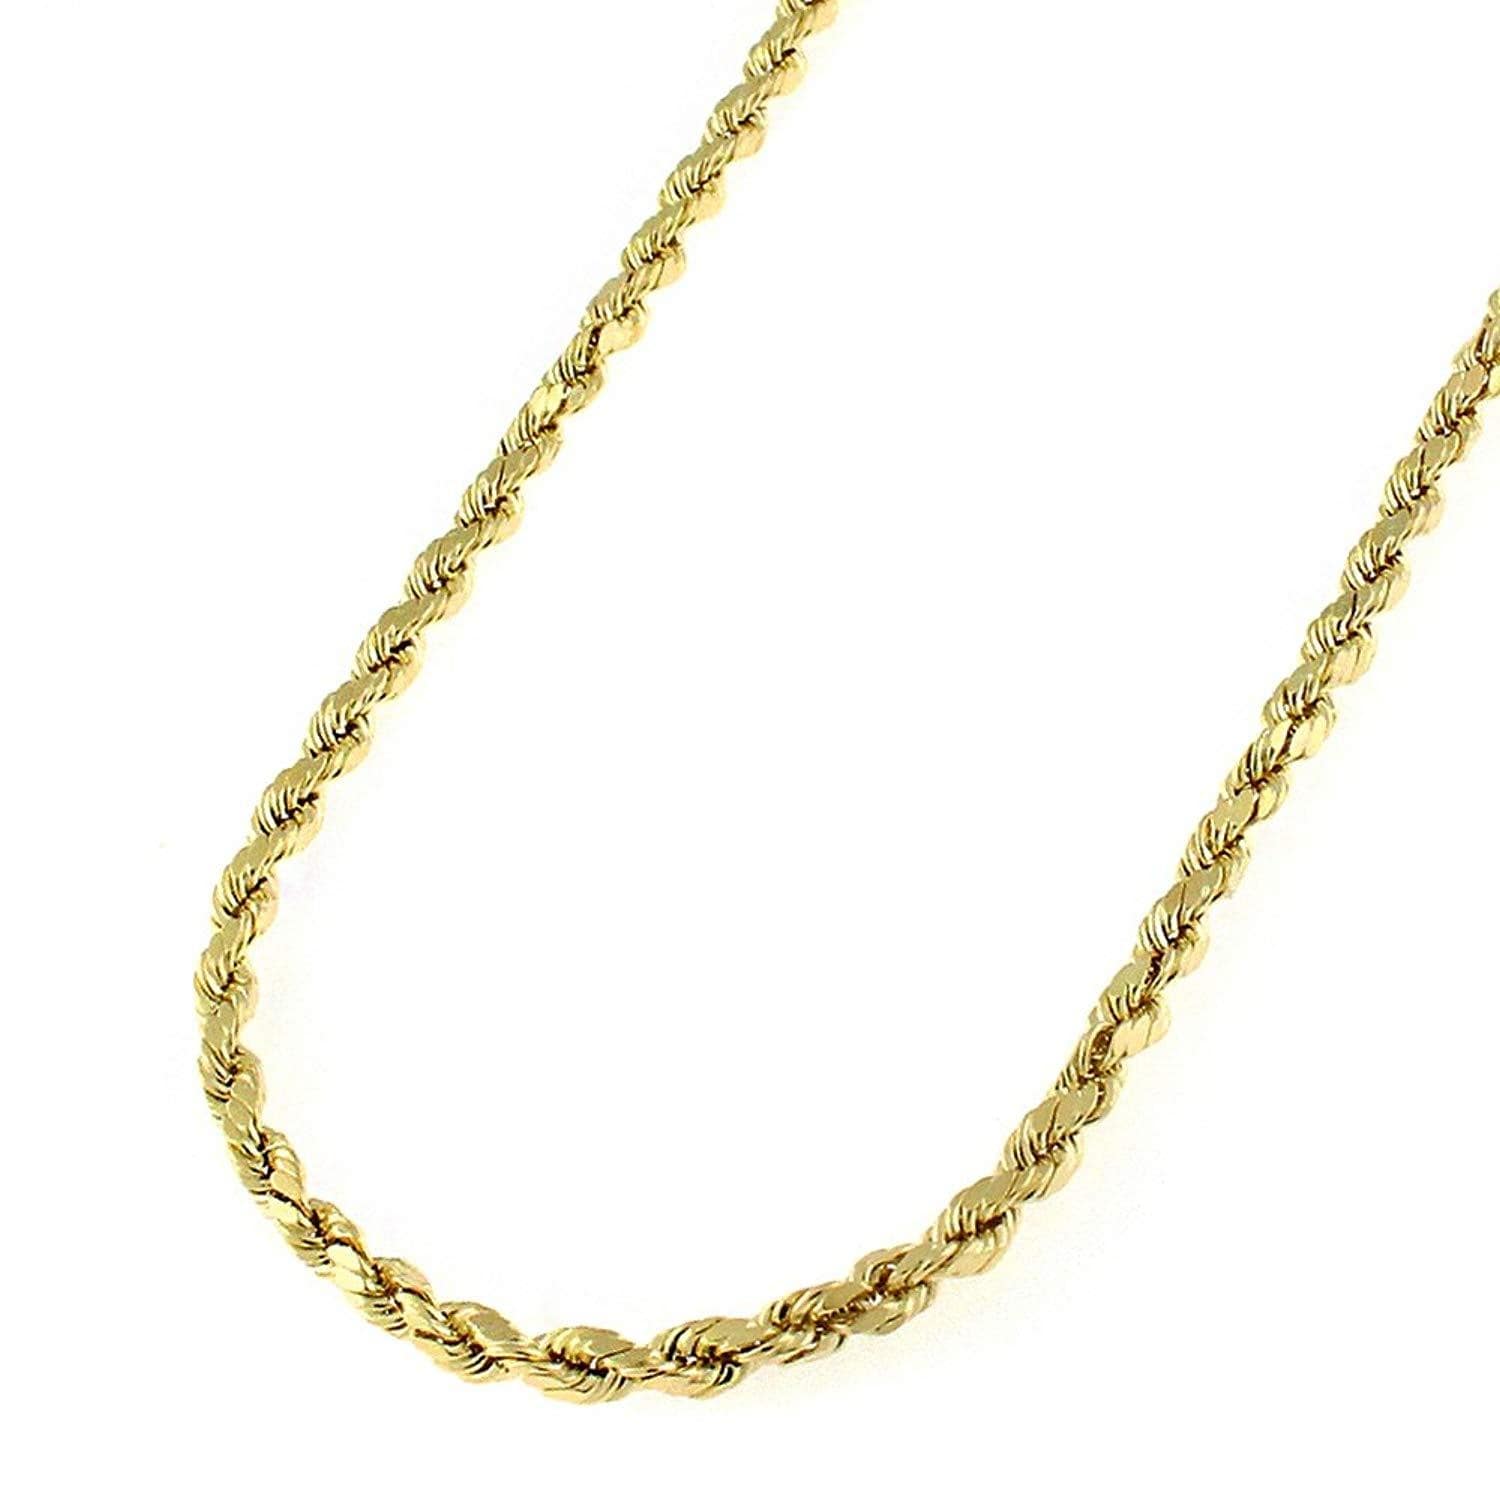 10k Solid Sparkle Cut Cable Chain Necklace Jewelry Gifts for Women in White Gold Yellow Gold Choice of Lengths 14 16 18 20 24 and Variety of mm Options 